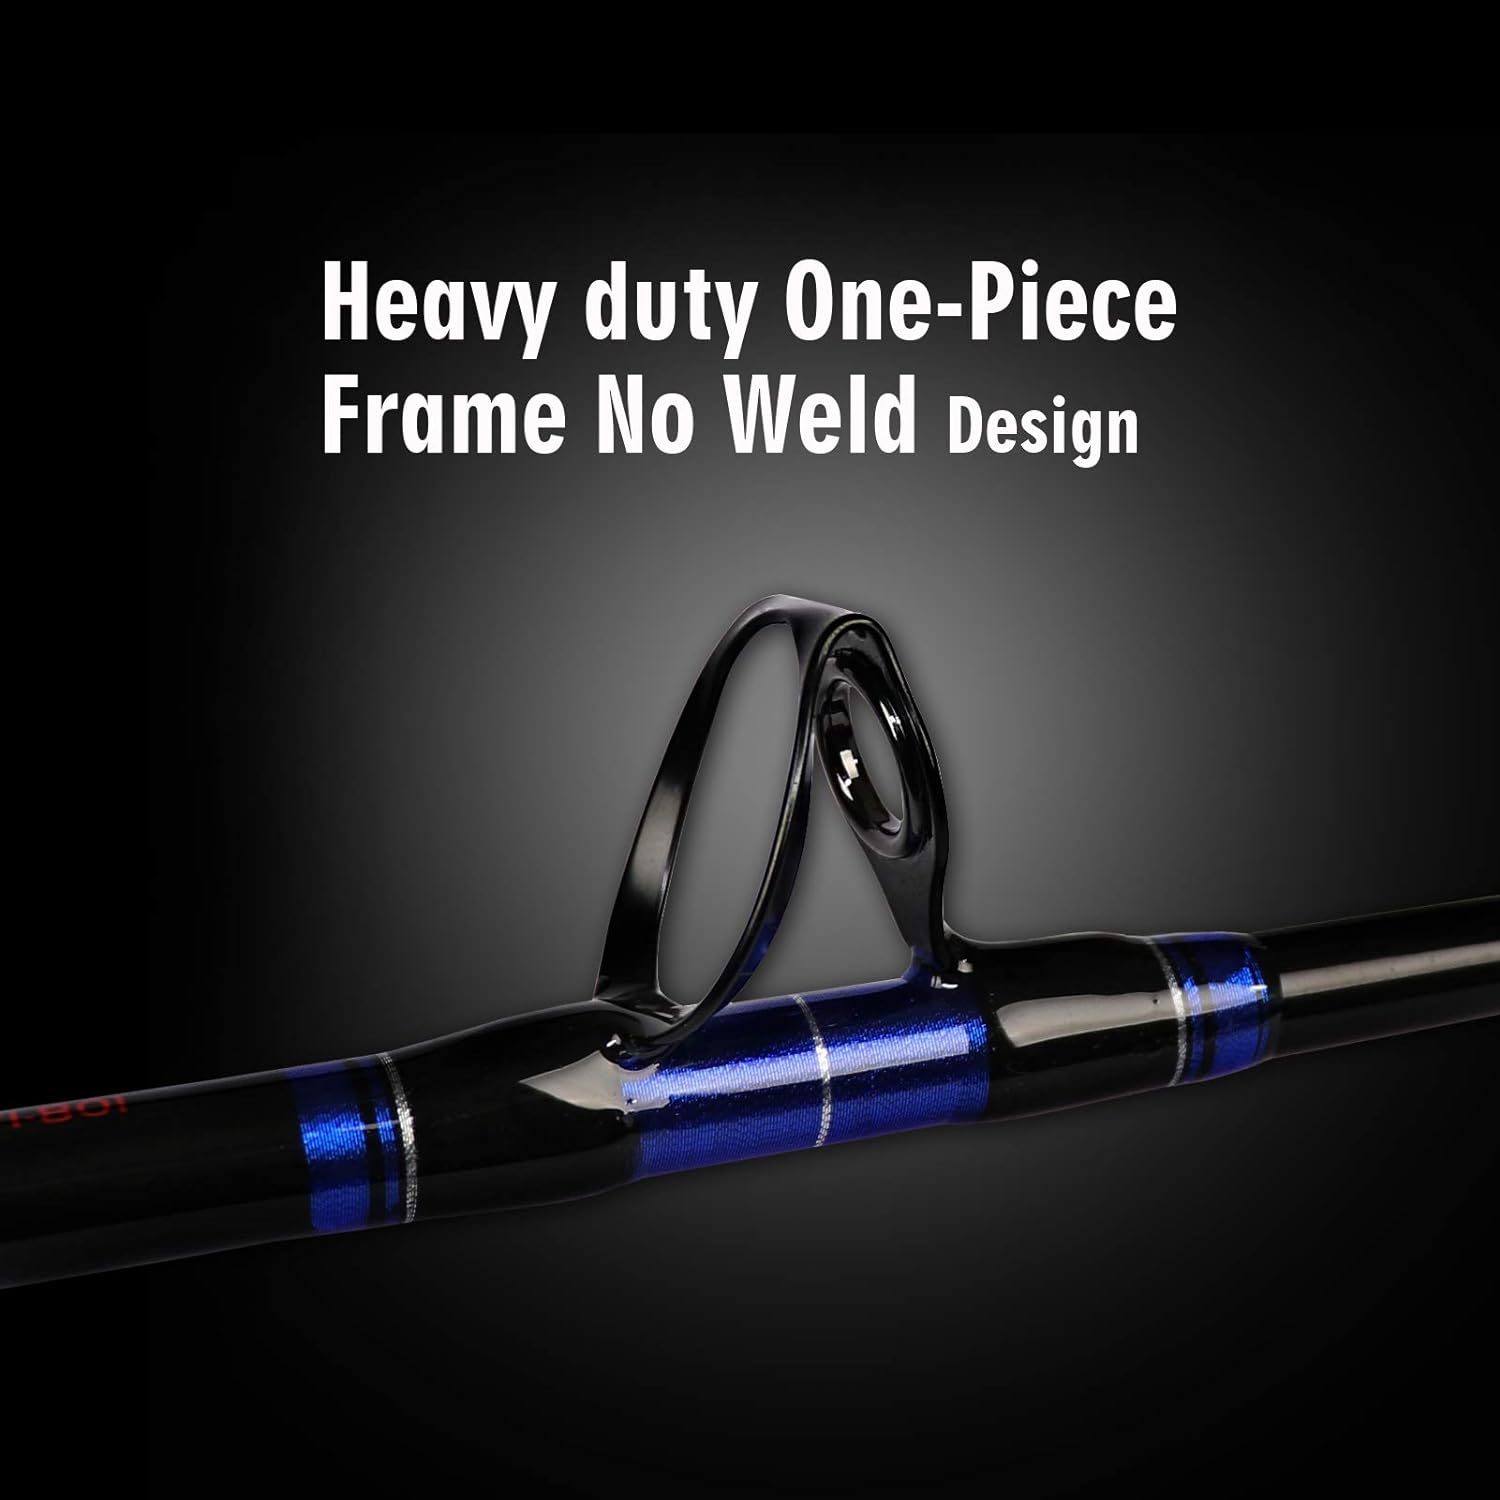 Fiblink 1-Piece/ 2-Piece Saltwater Offshore Trolling Rod Big Game Rod Conventional Boat Fishing Pole